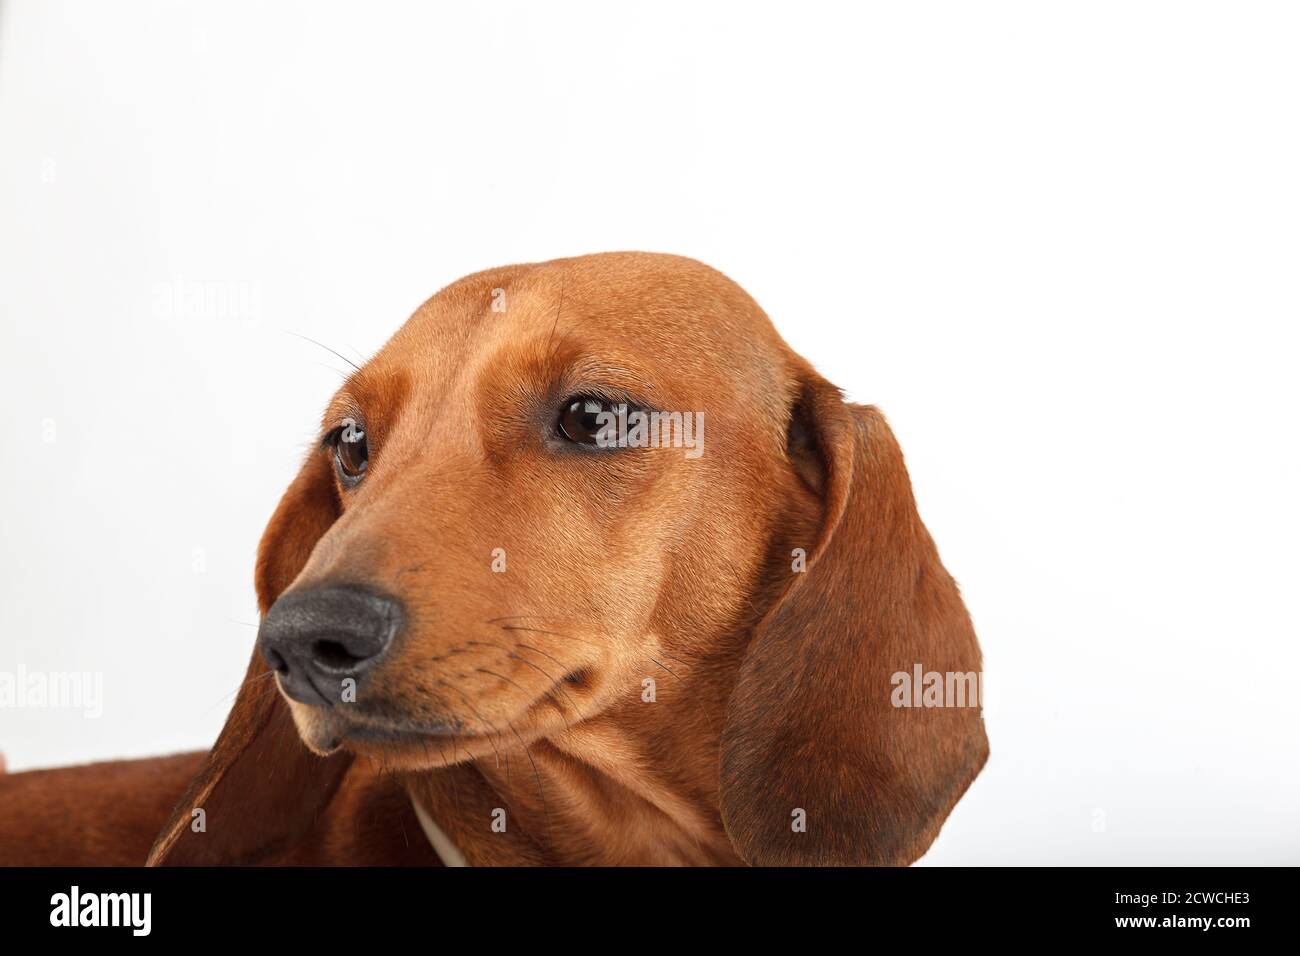 Smooth-haired dachshund, isolated on white background. Red-haired dog. Stock Photo